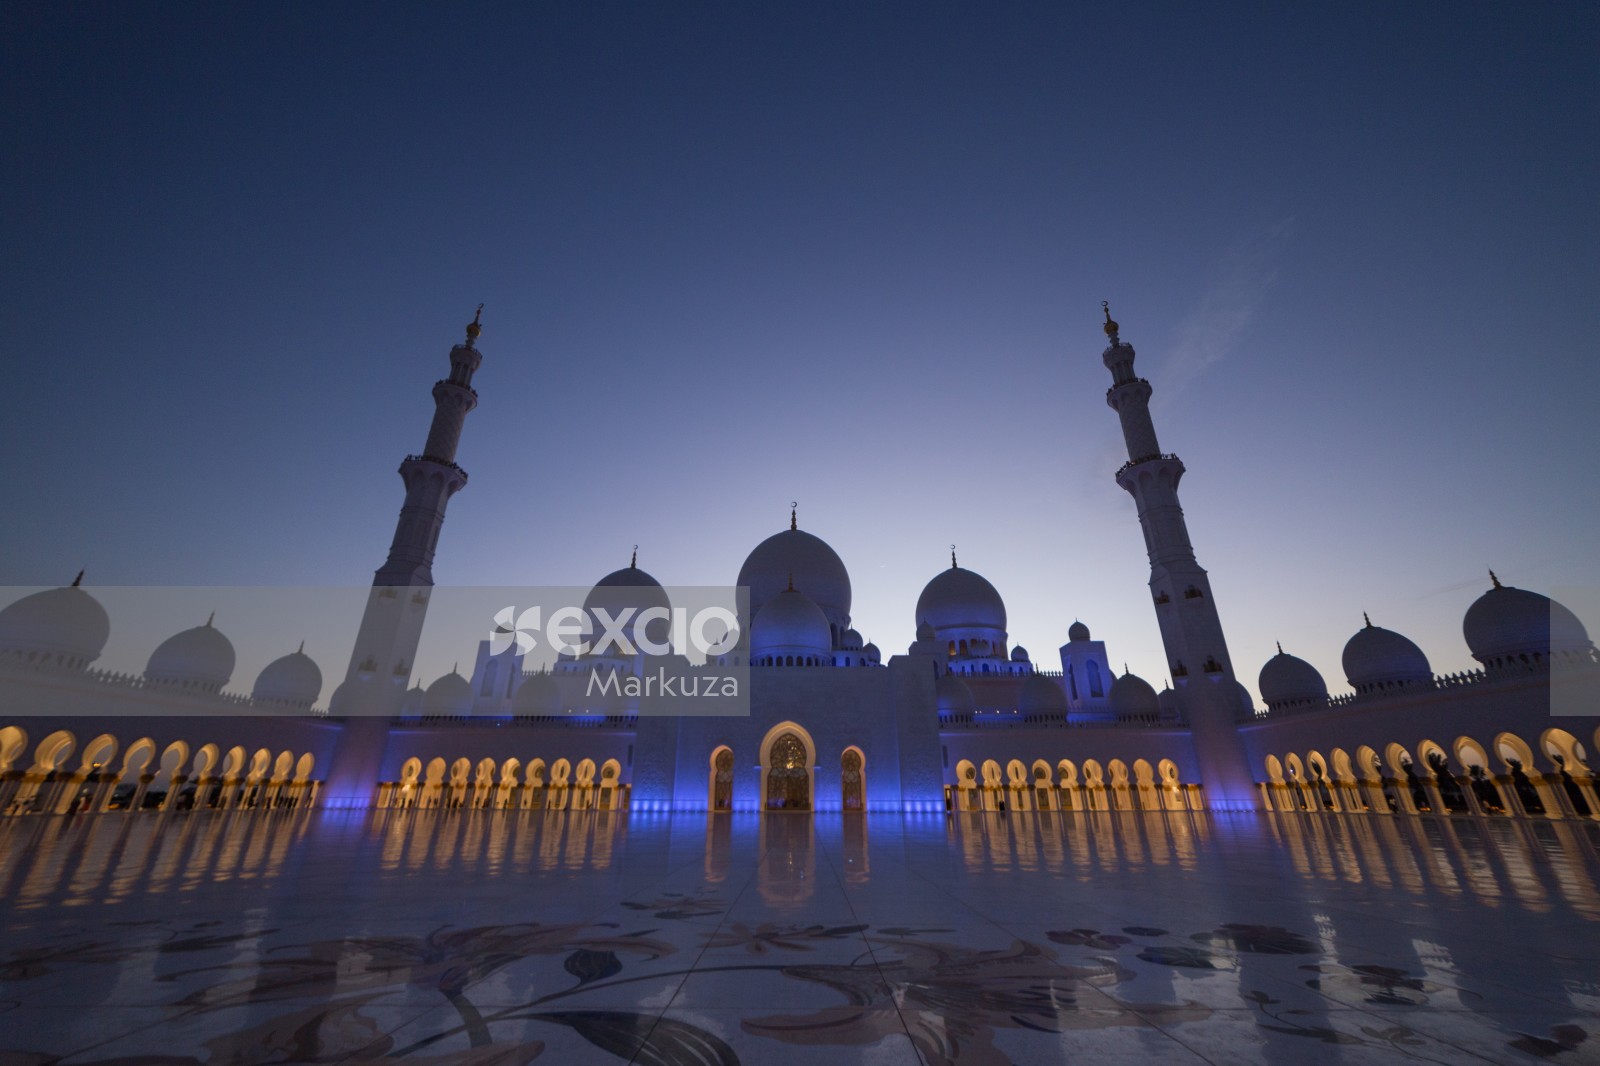 Evening at the Sheik Zayed Grand Mosque